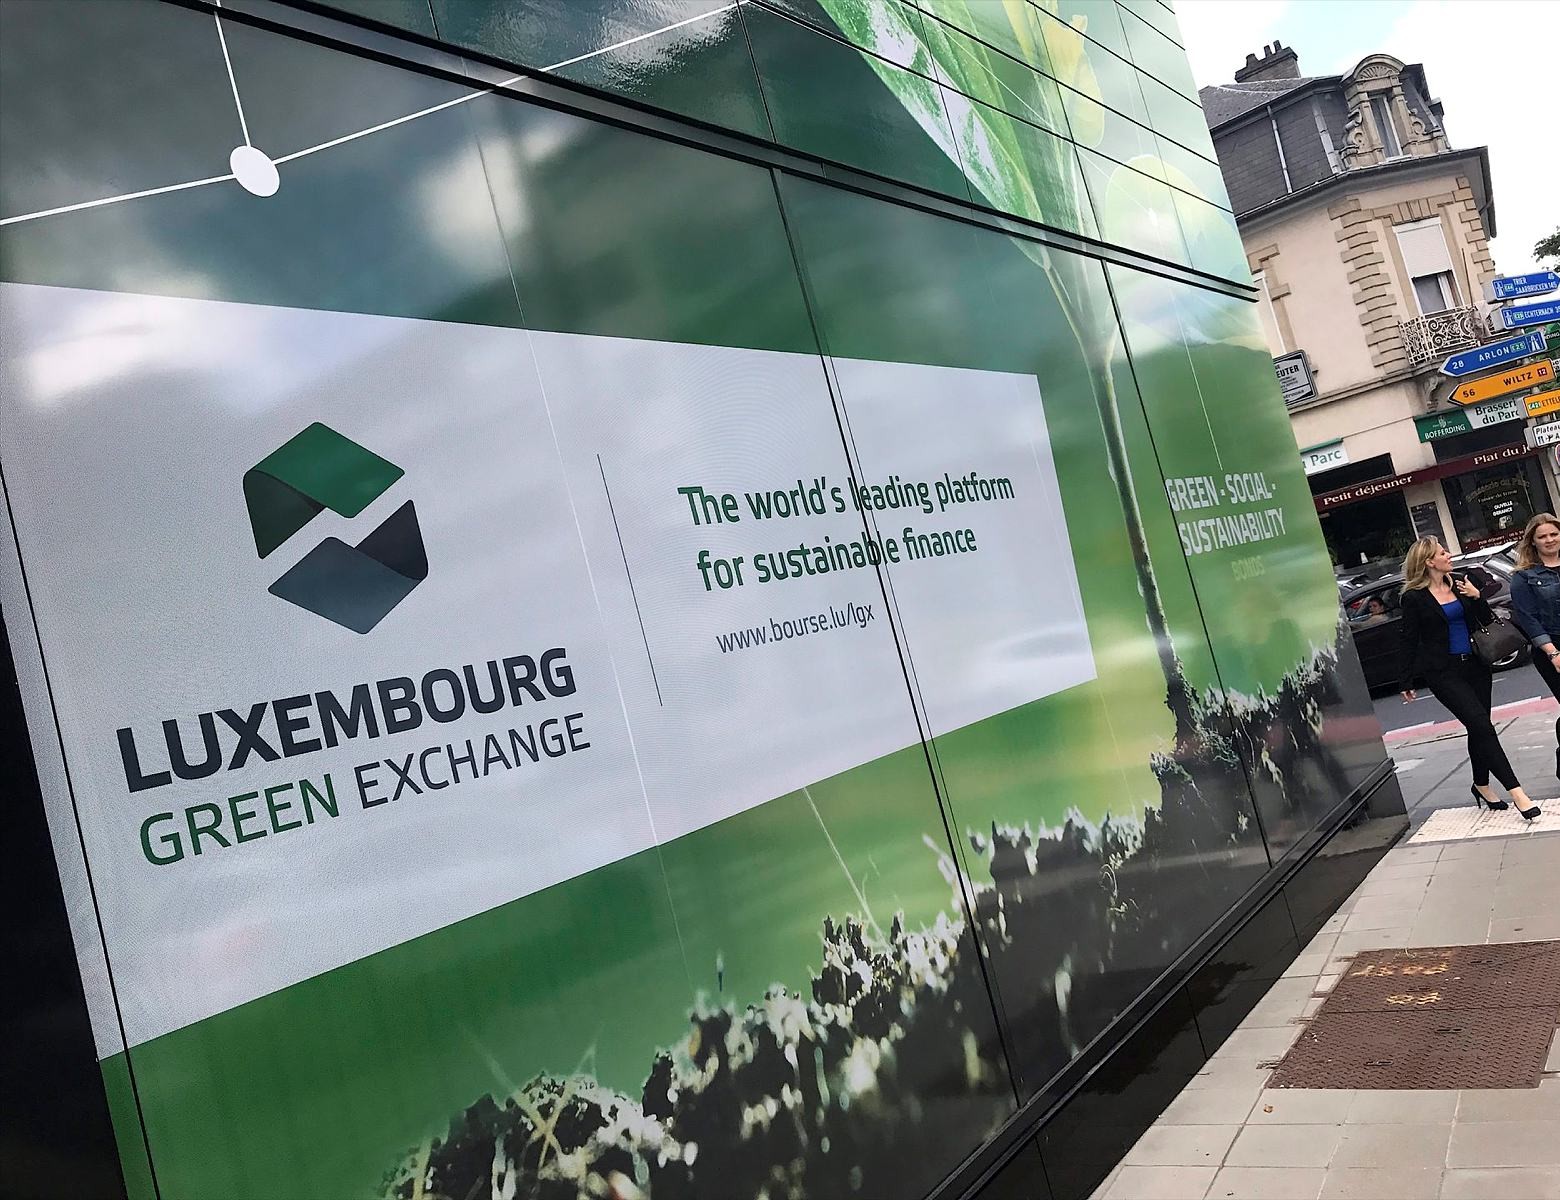 The Luxembourg Stock Exchange has the "Luxembourg Green Exchange", where half of the green bonds of the planet are listed - Credits: Edit Press